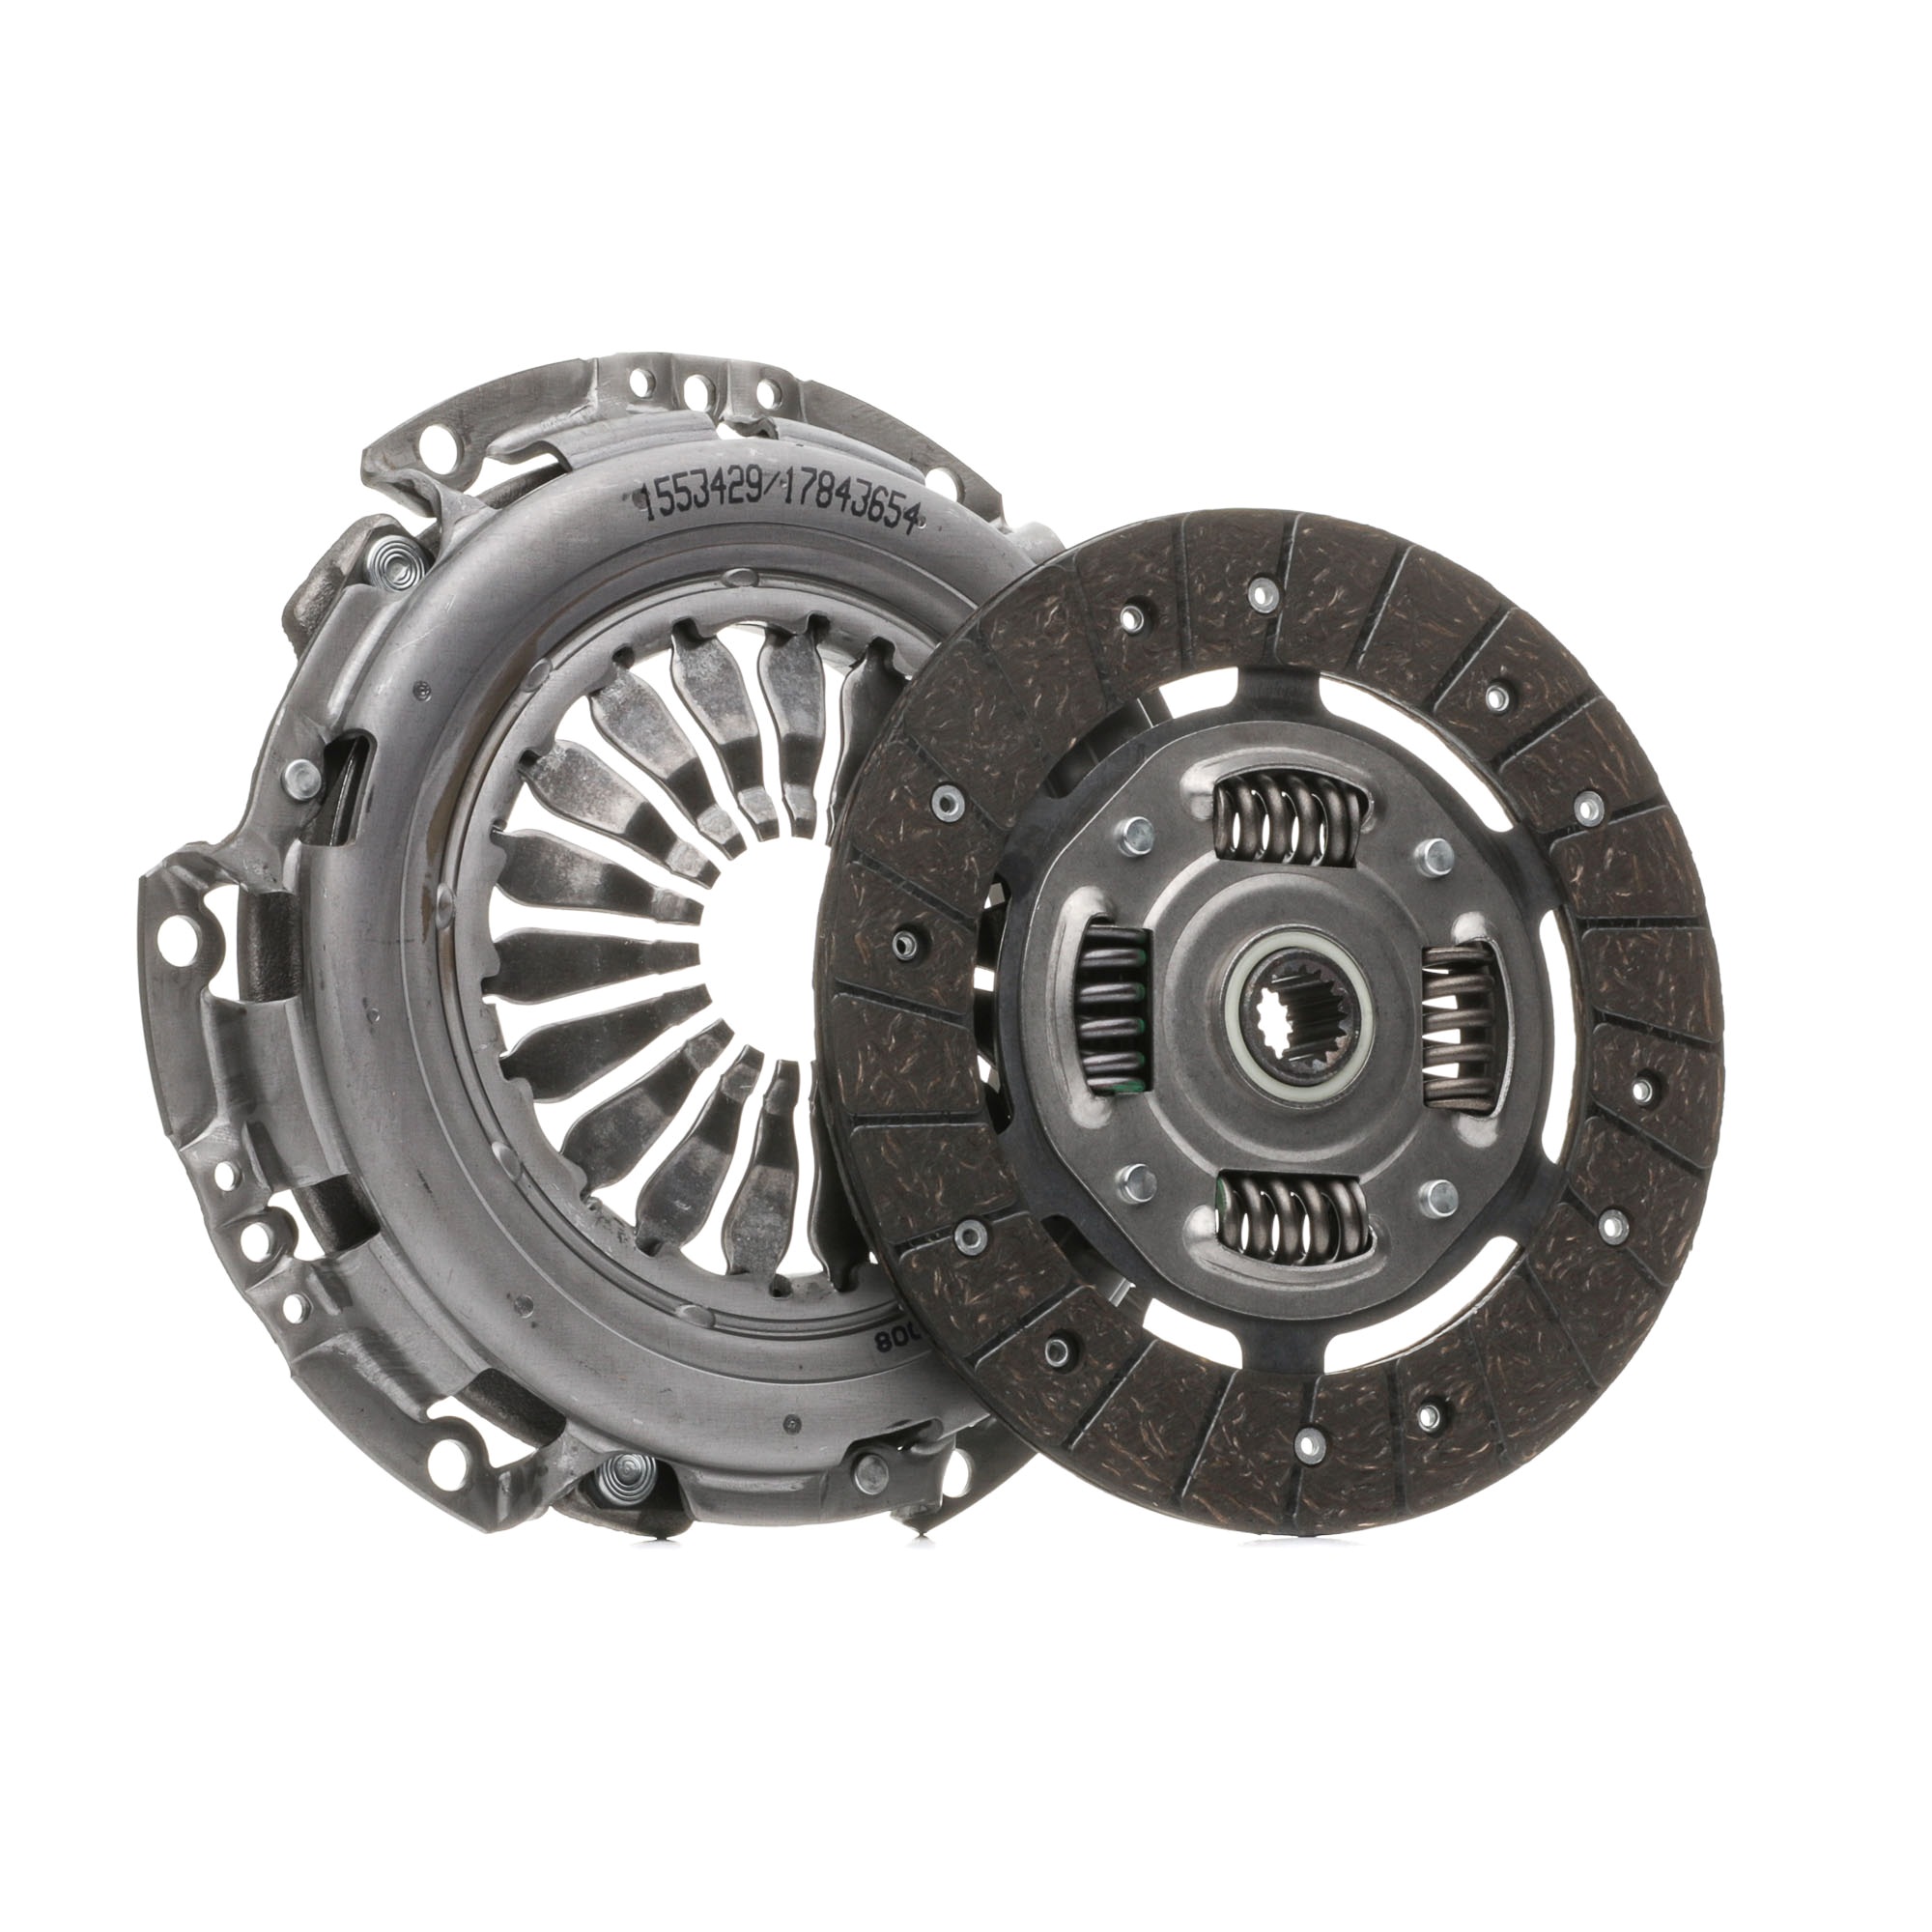 RIDEX 479C3752 Clutch kit with clutch pressure plate, with clutch disc, without clutch release bearing, 200mm